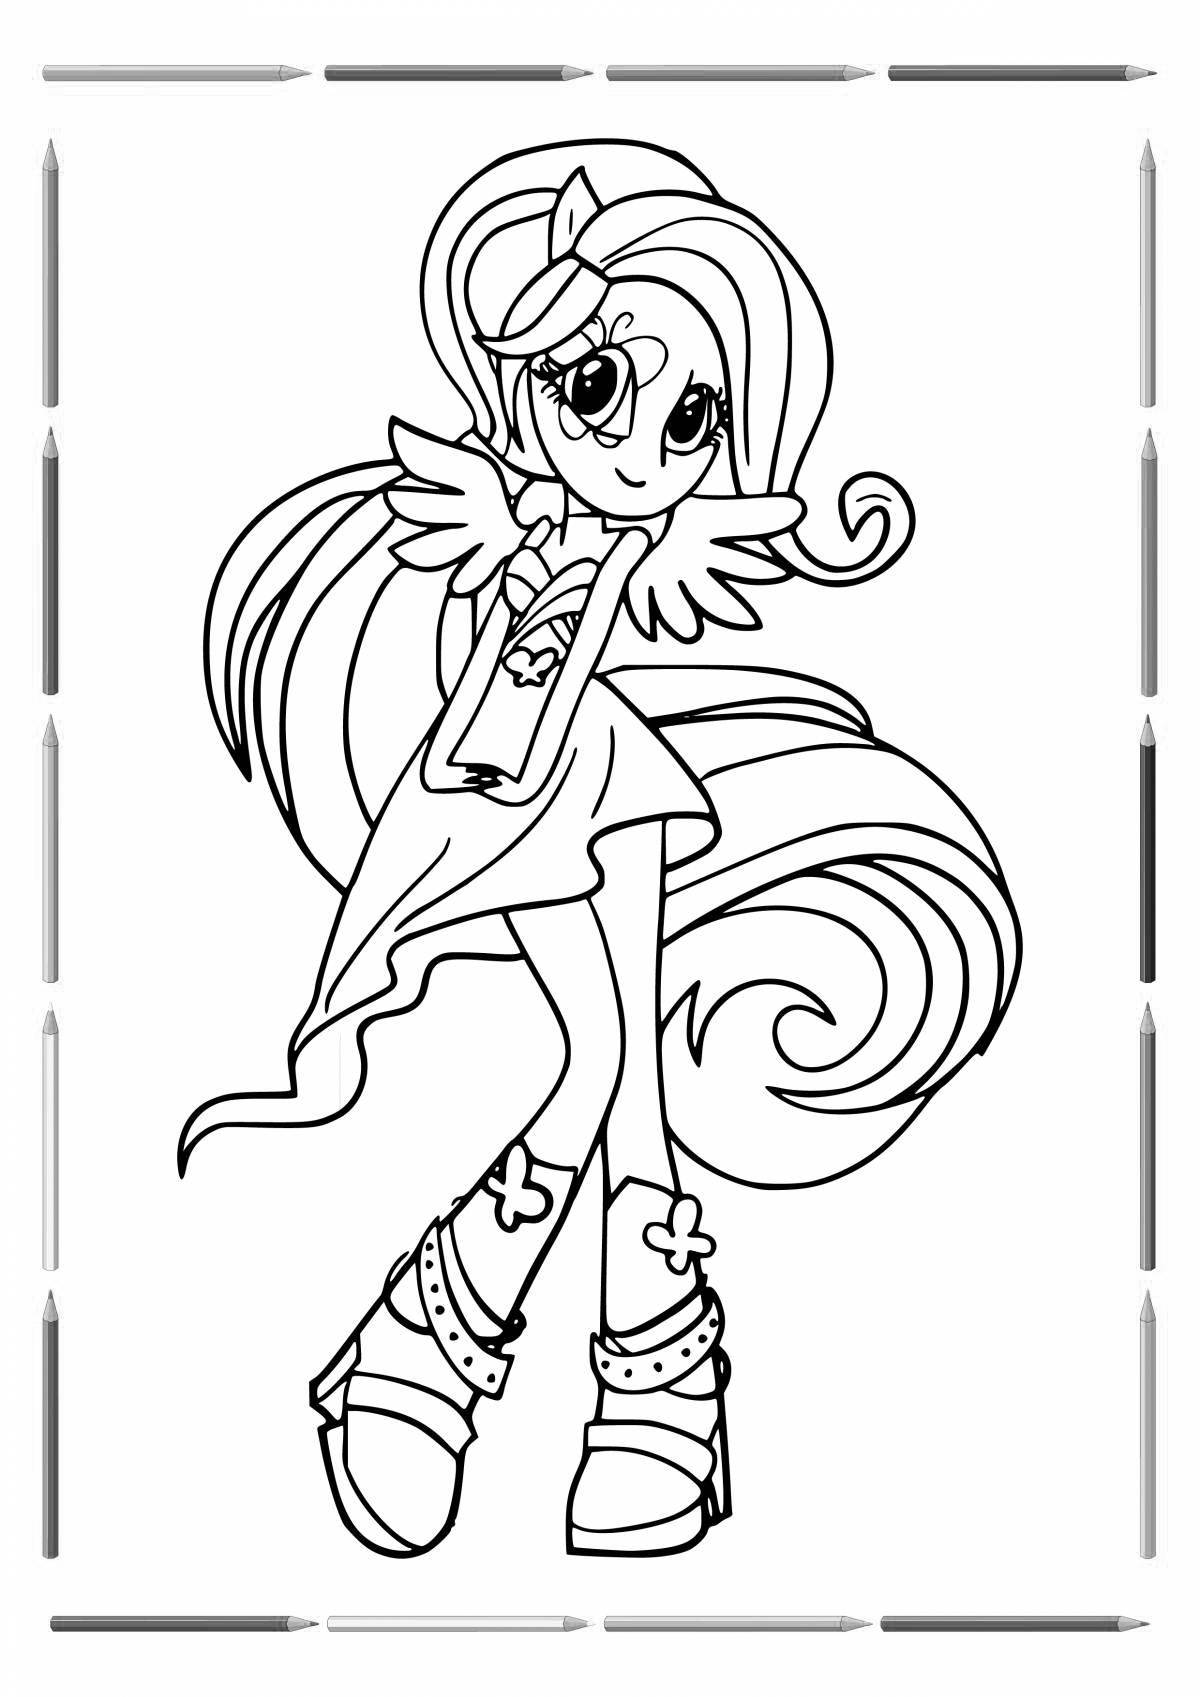 Fancy coloring my little pony equestria girls